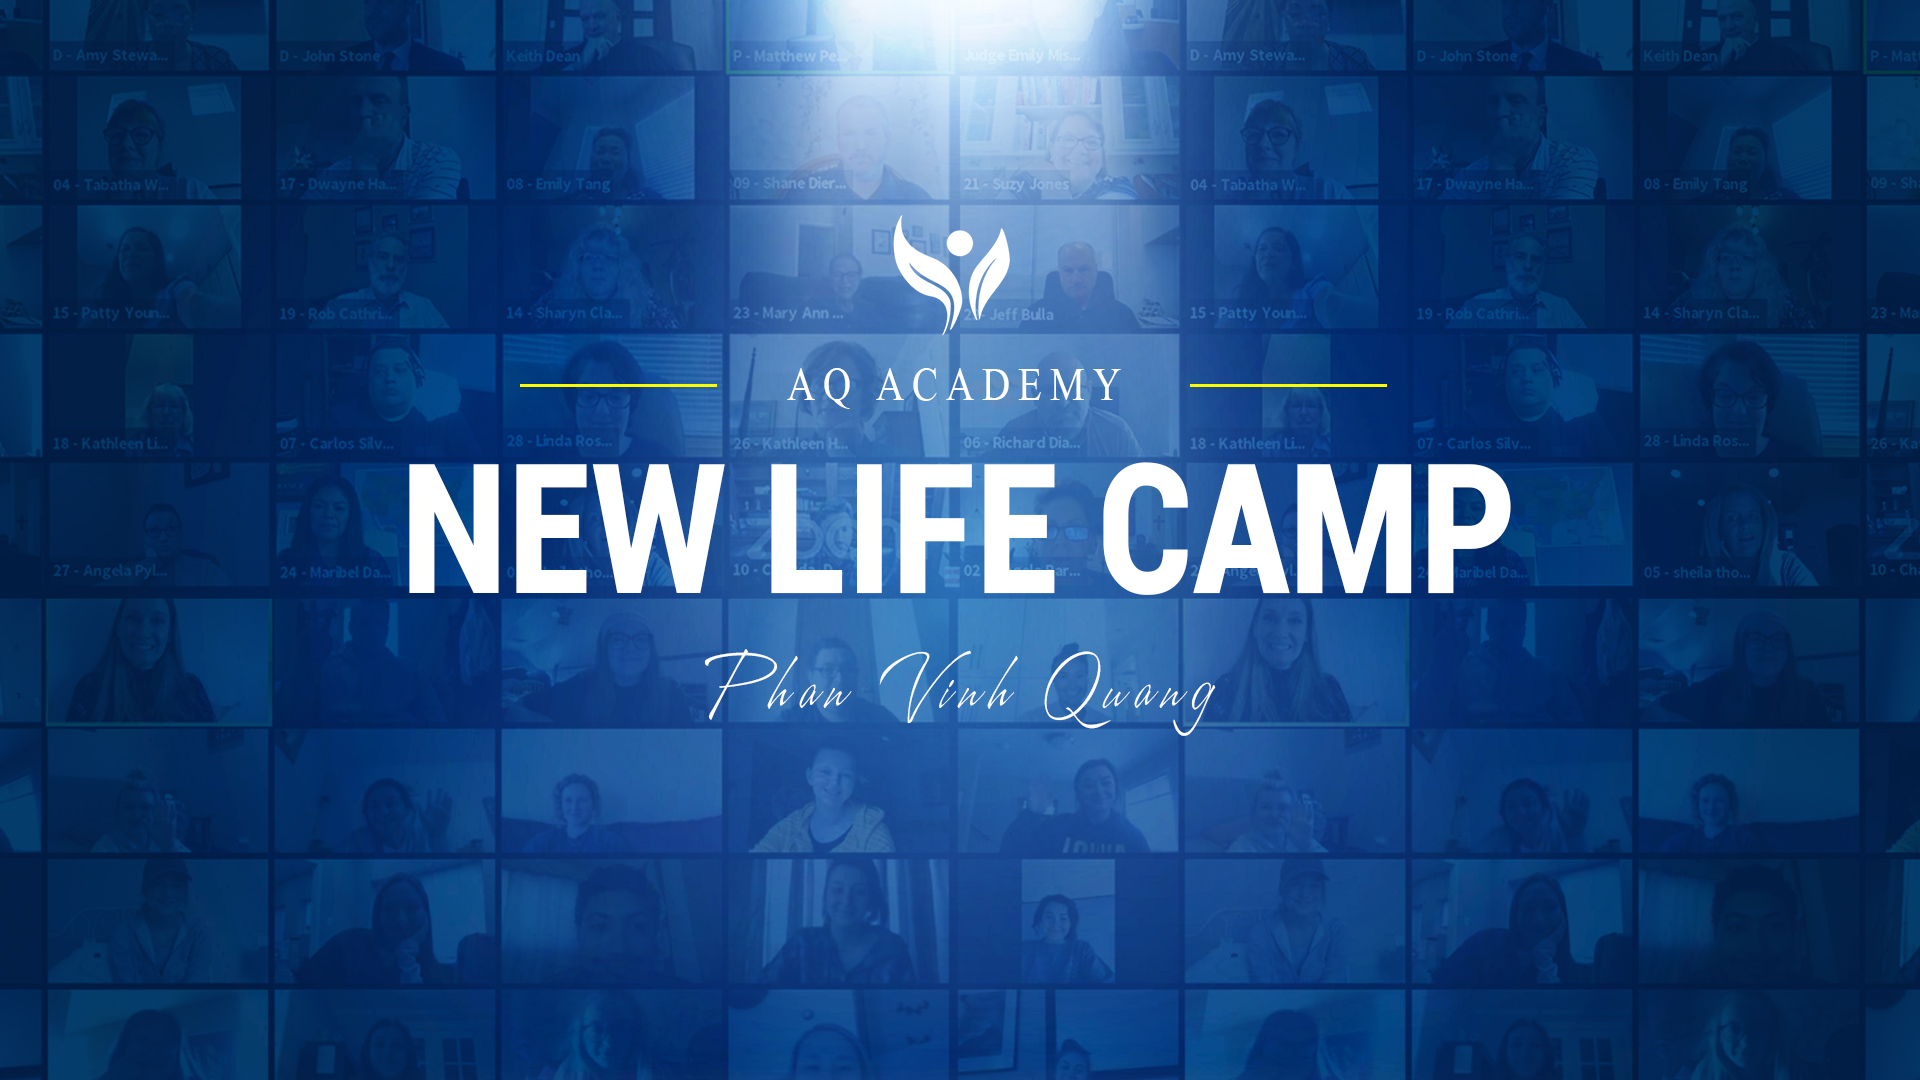 NEW LIFE CAMP - MASTERY PEOPLE